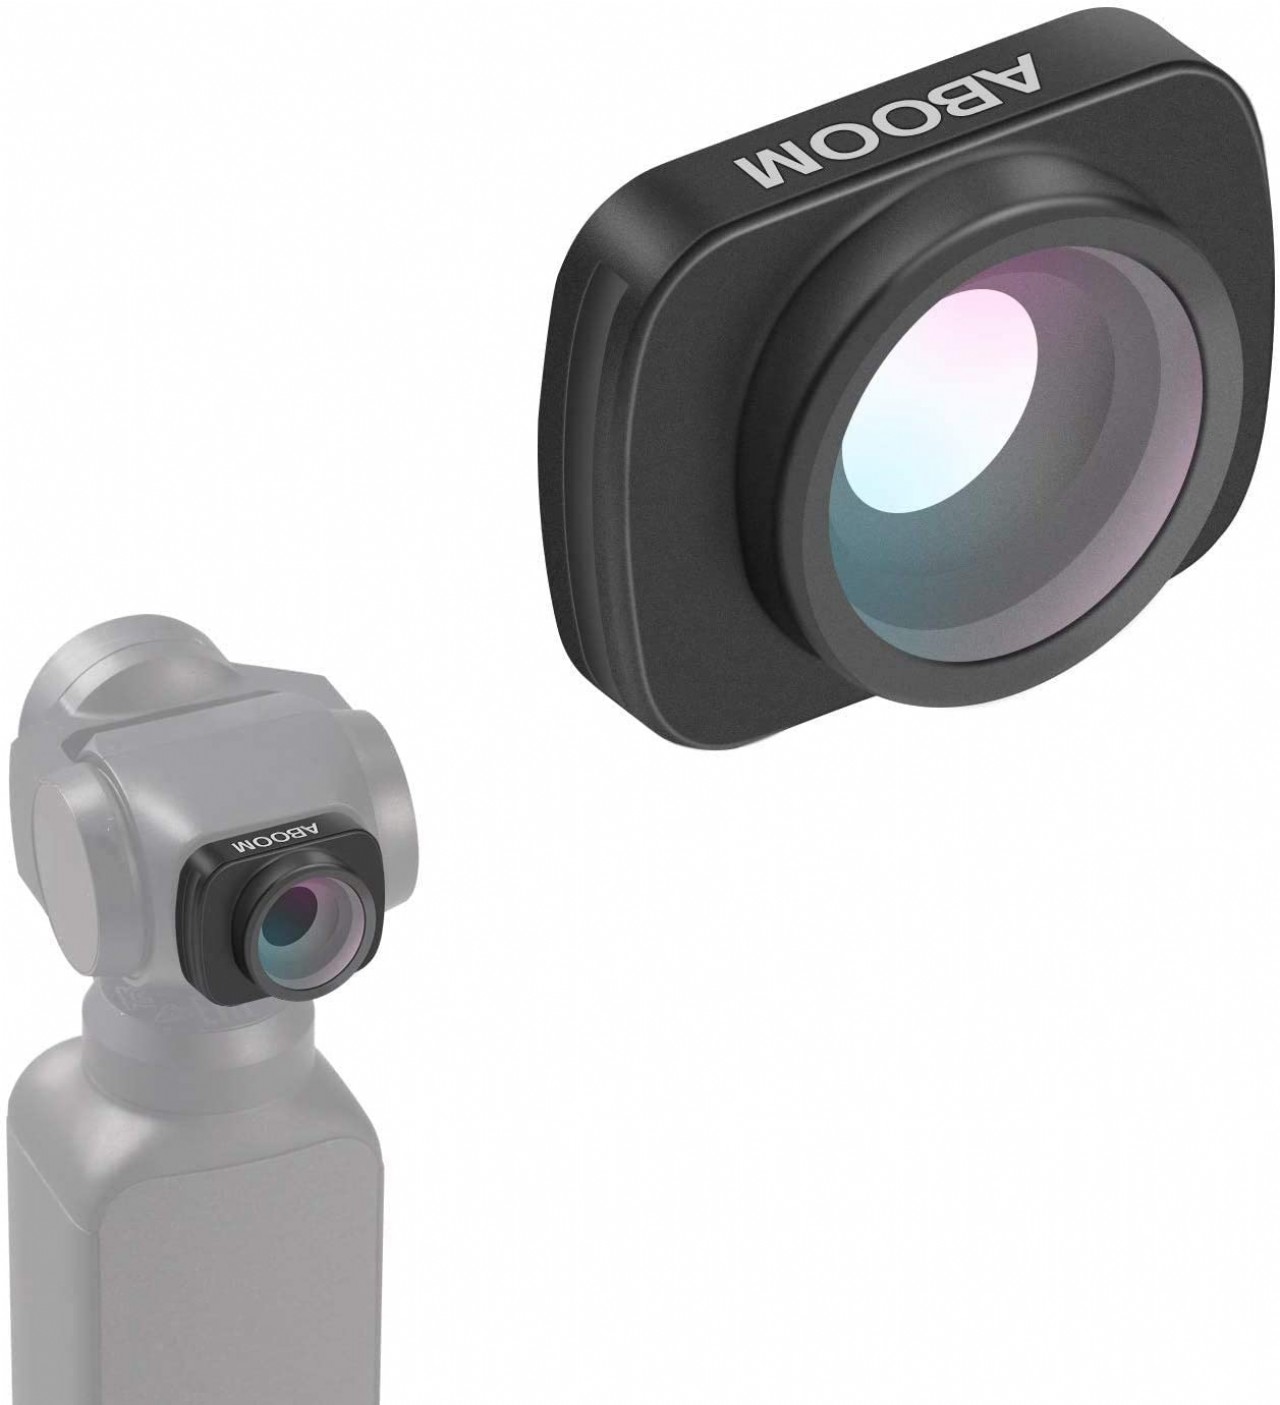 Aboom 0.6X HD Wide Angle Lens for Osmo Pocket Accessories Expand The Field of View Vlog and YouTube